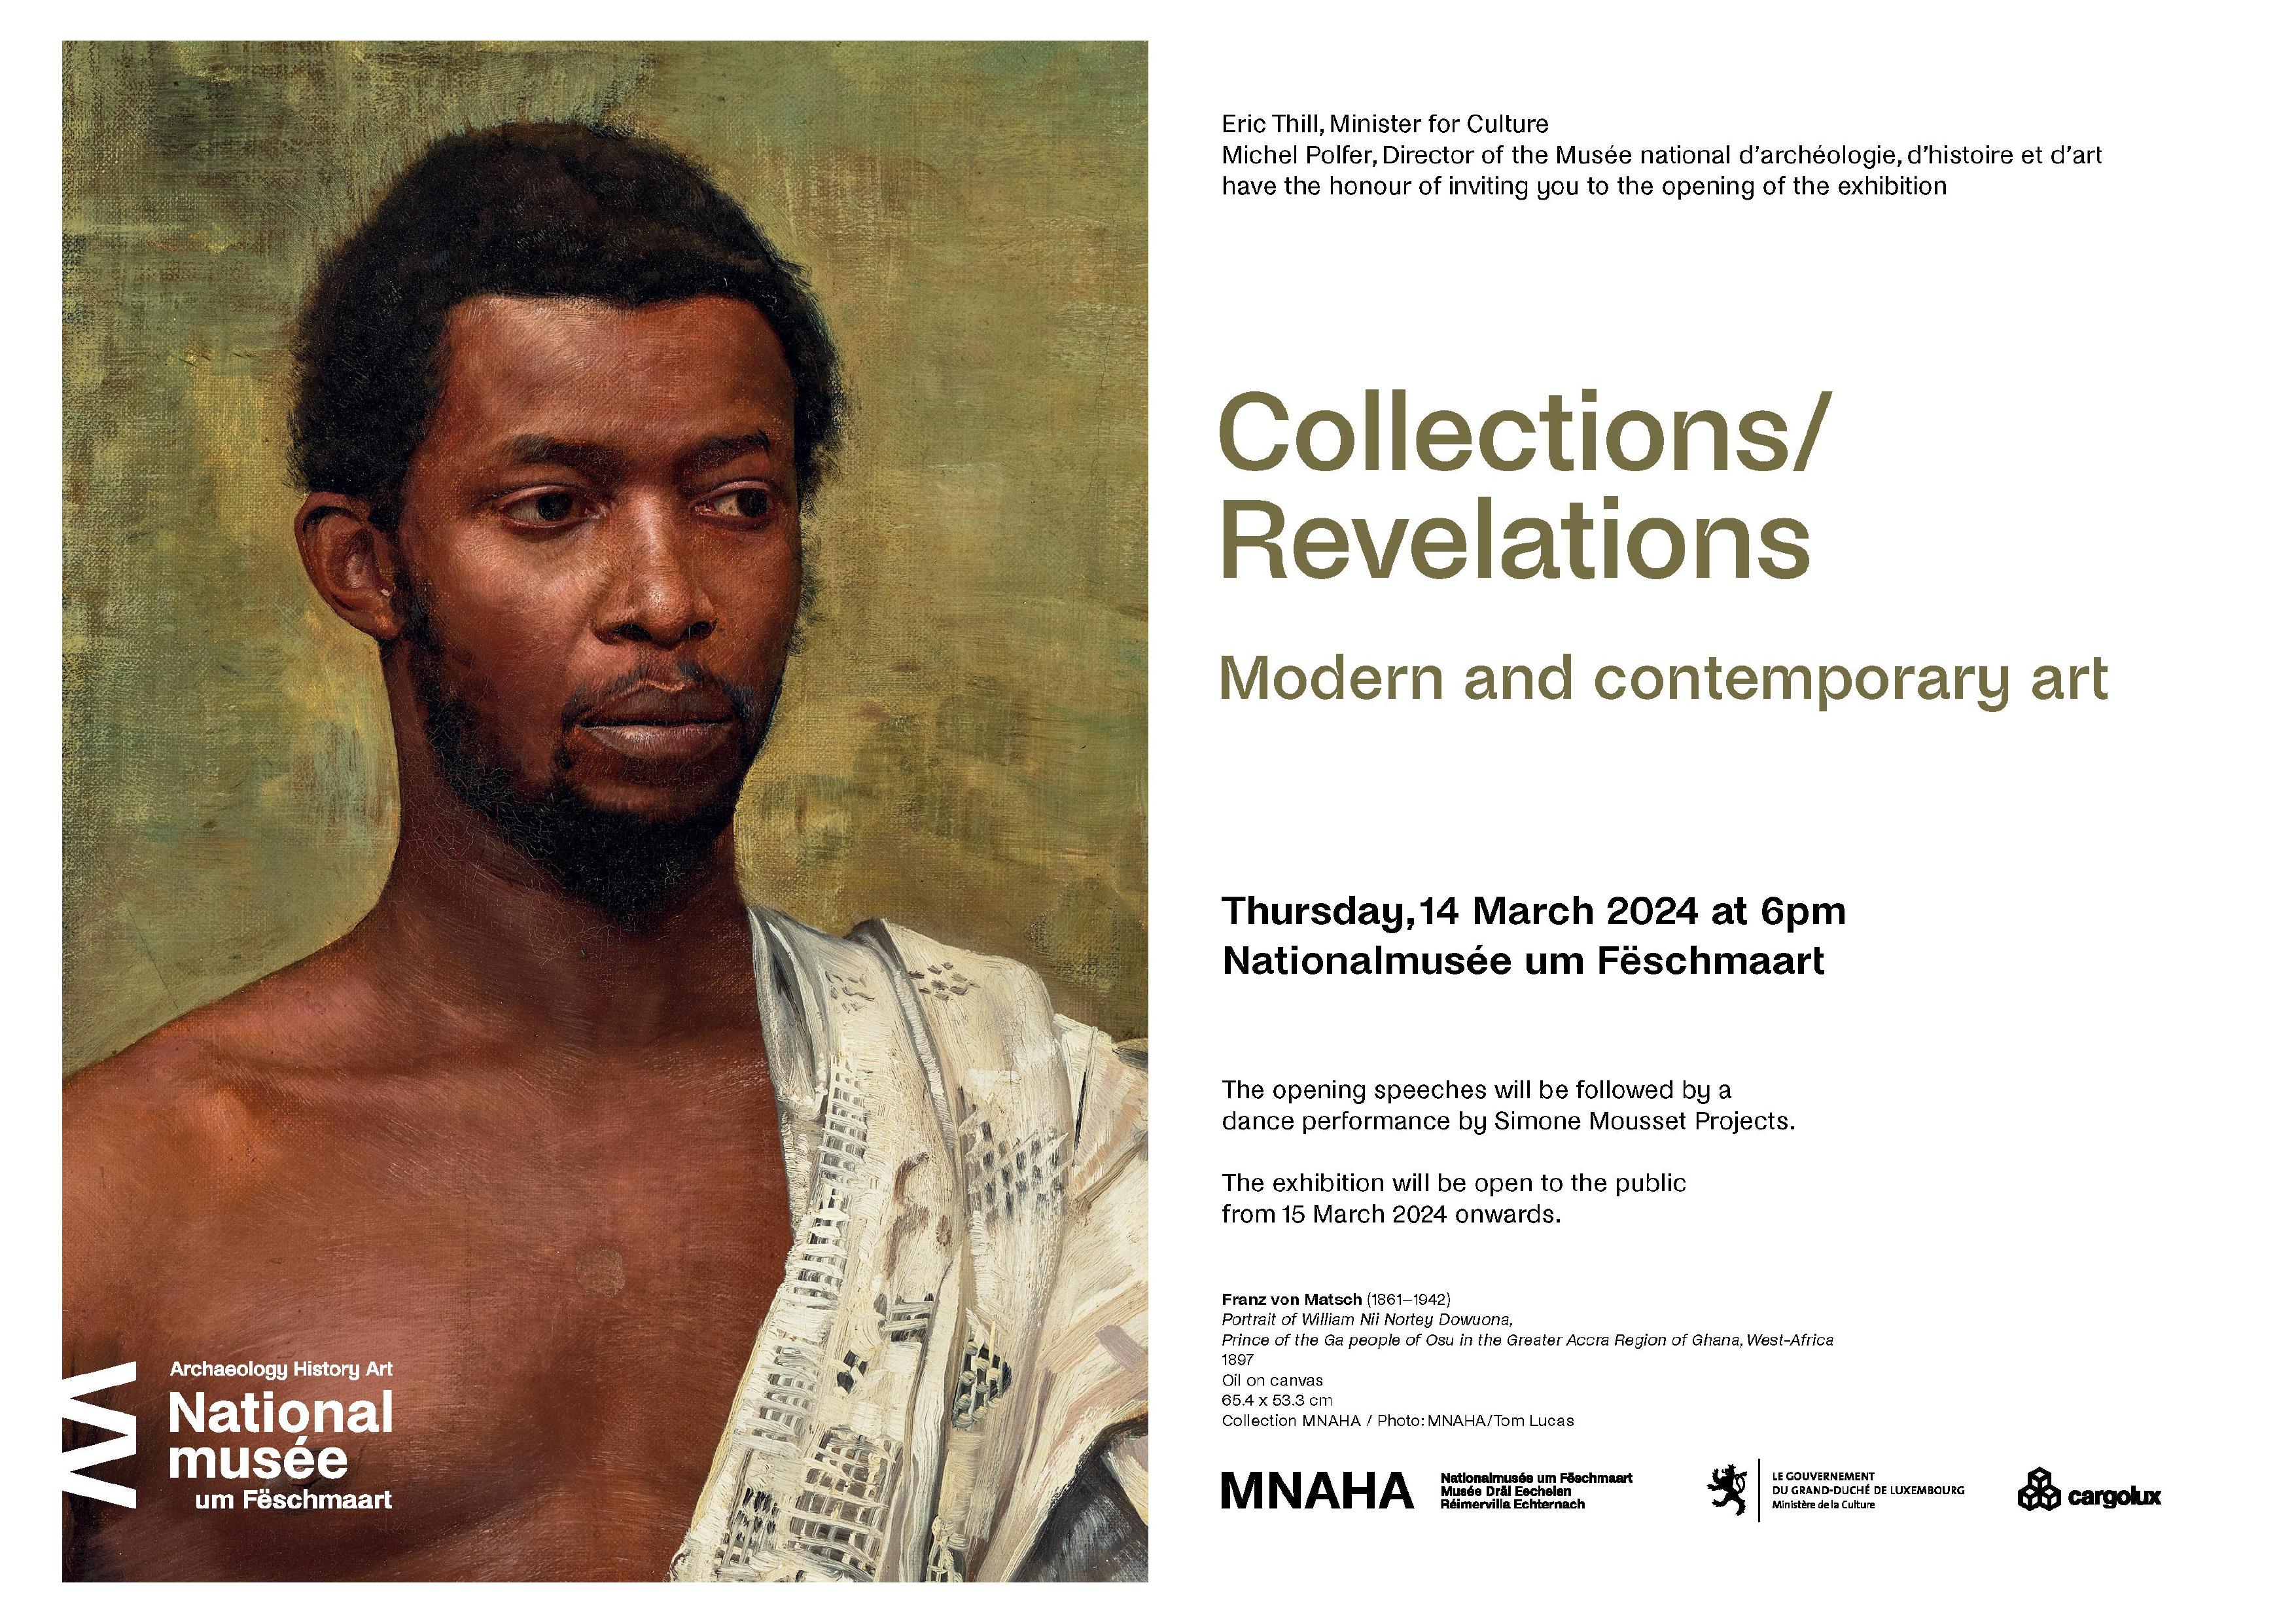 Exposition "Collections/Revelations. Modern and contemporary art" @ MNAHA Luxembourg